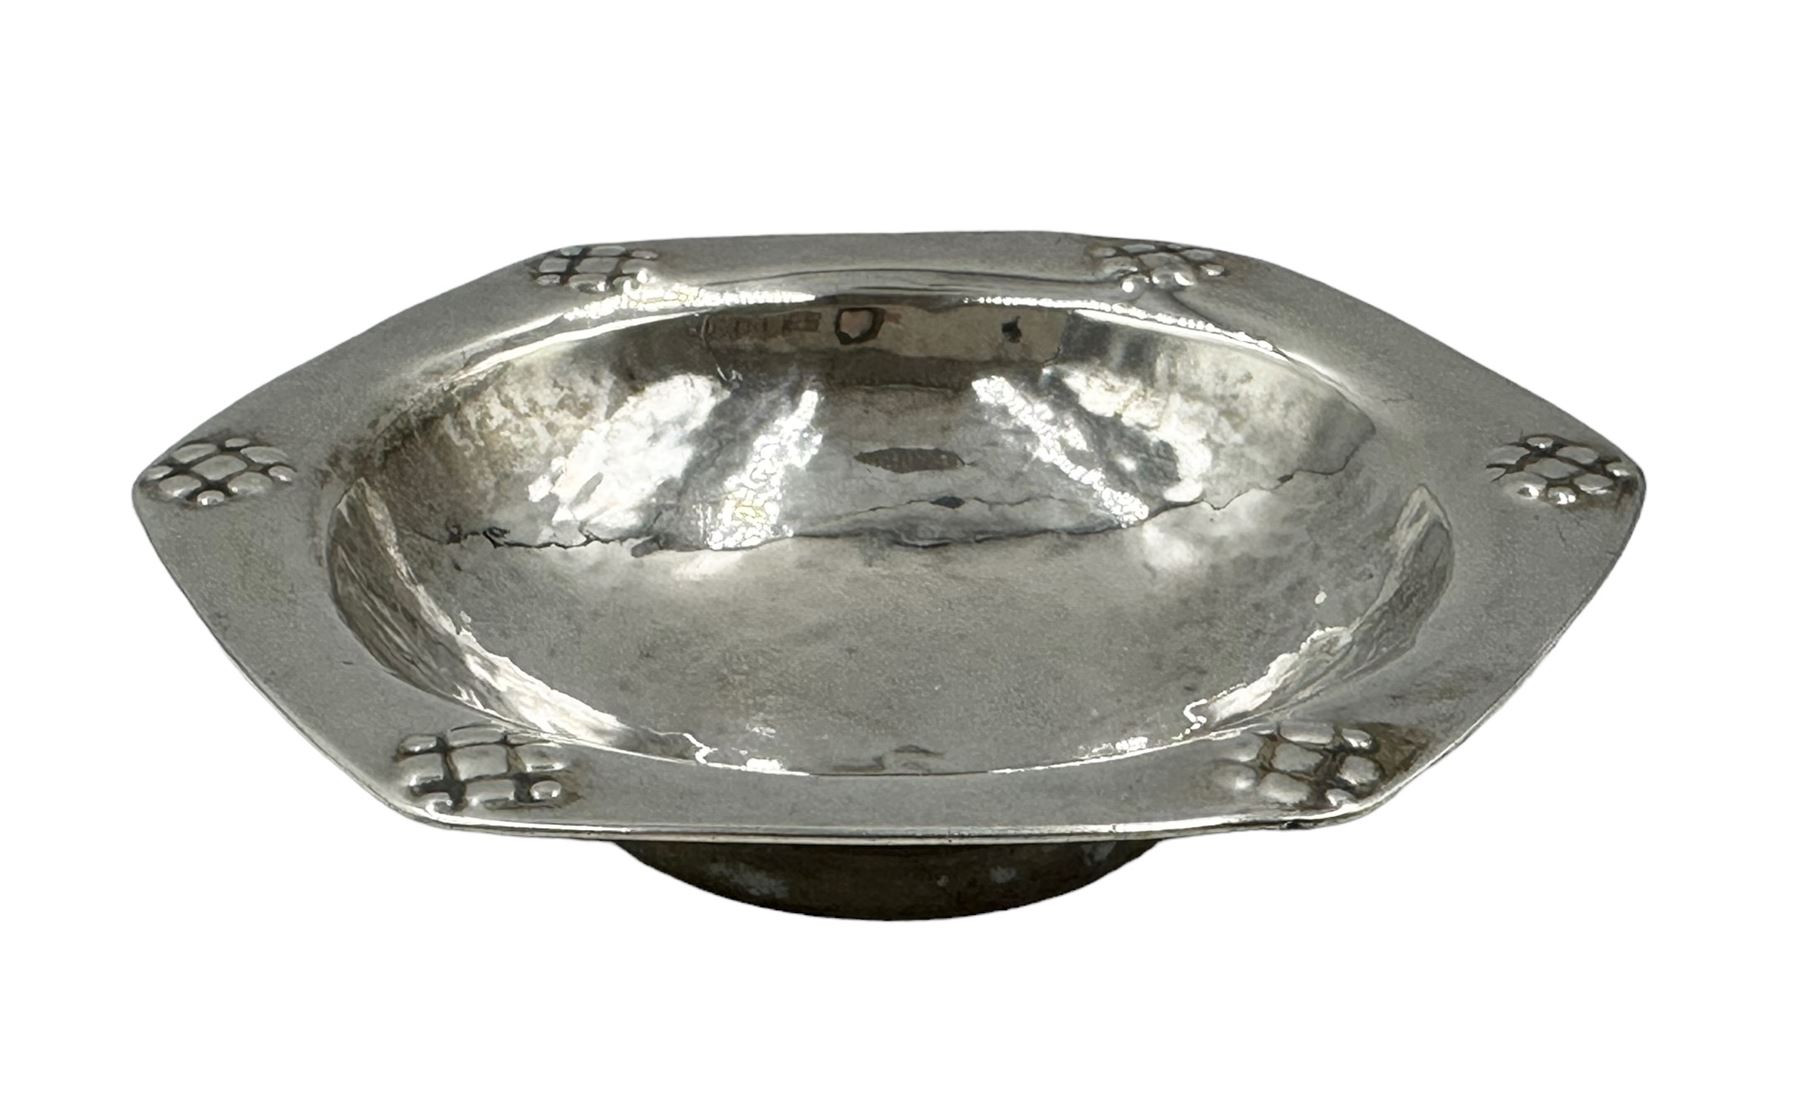 Hammered silver Arts and Crafts hexagonal dish decorated with raspberry prunts W8cm London 1913 Make - Image 2 of 4